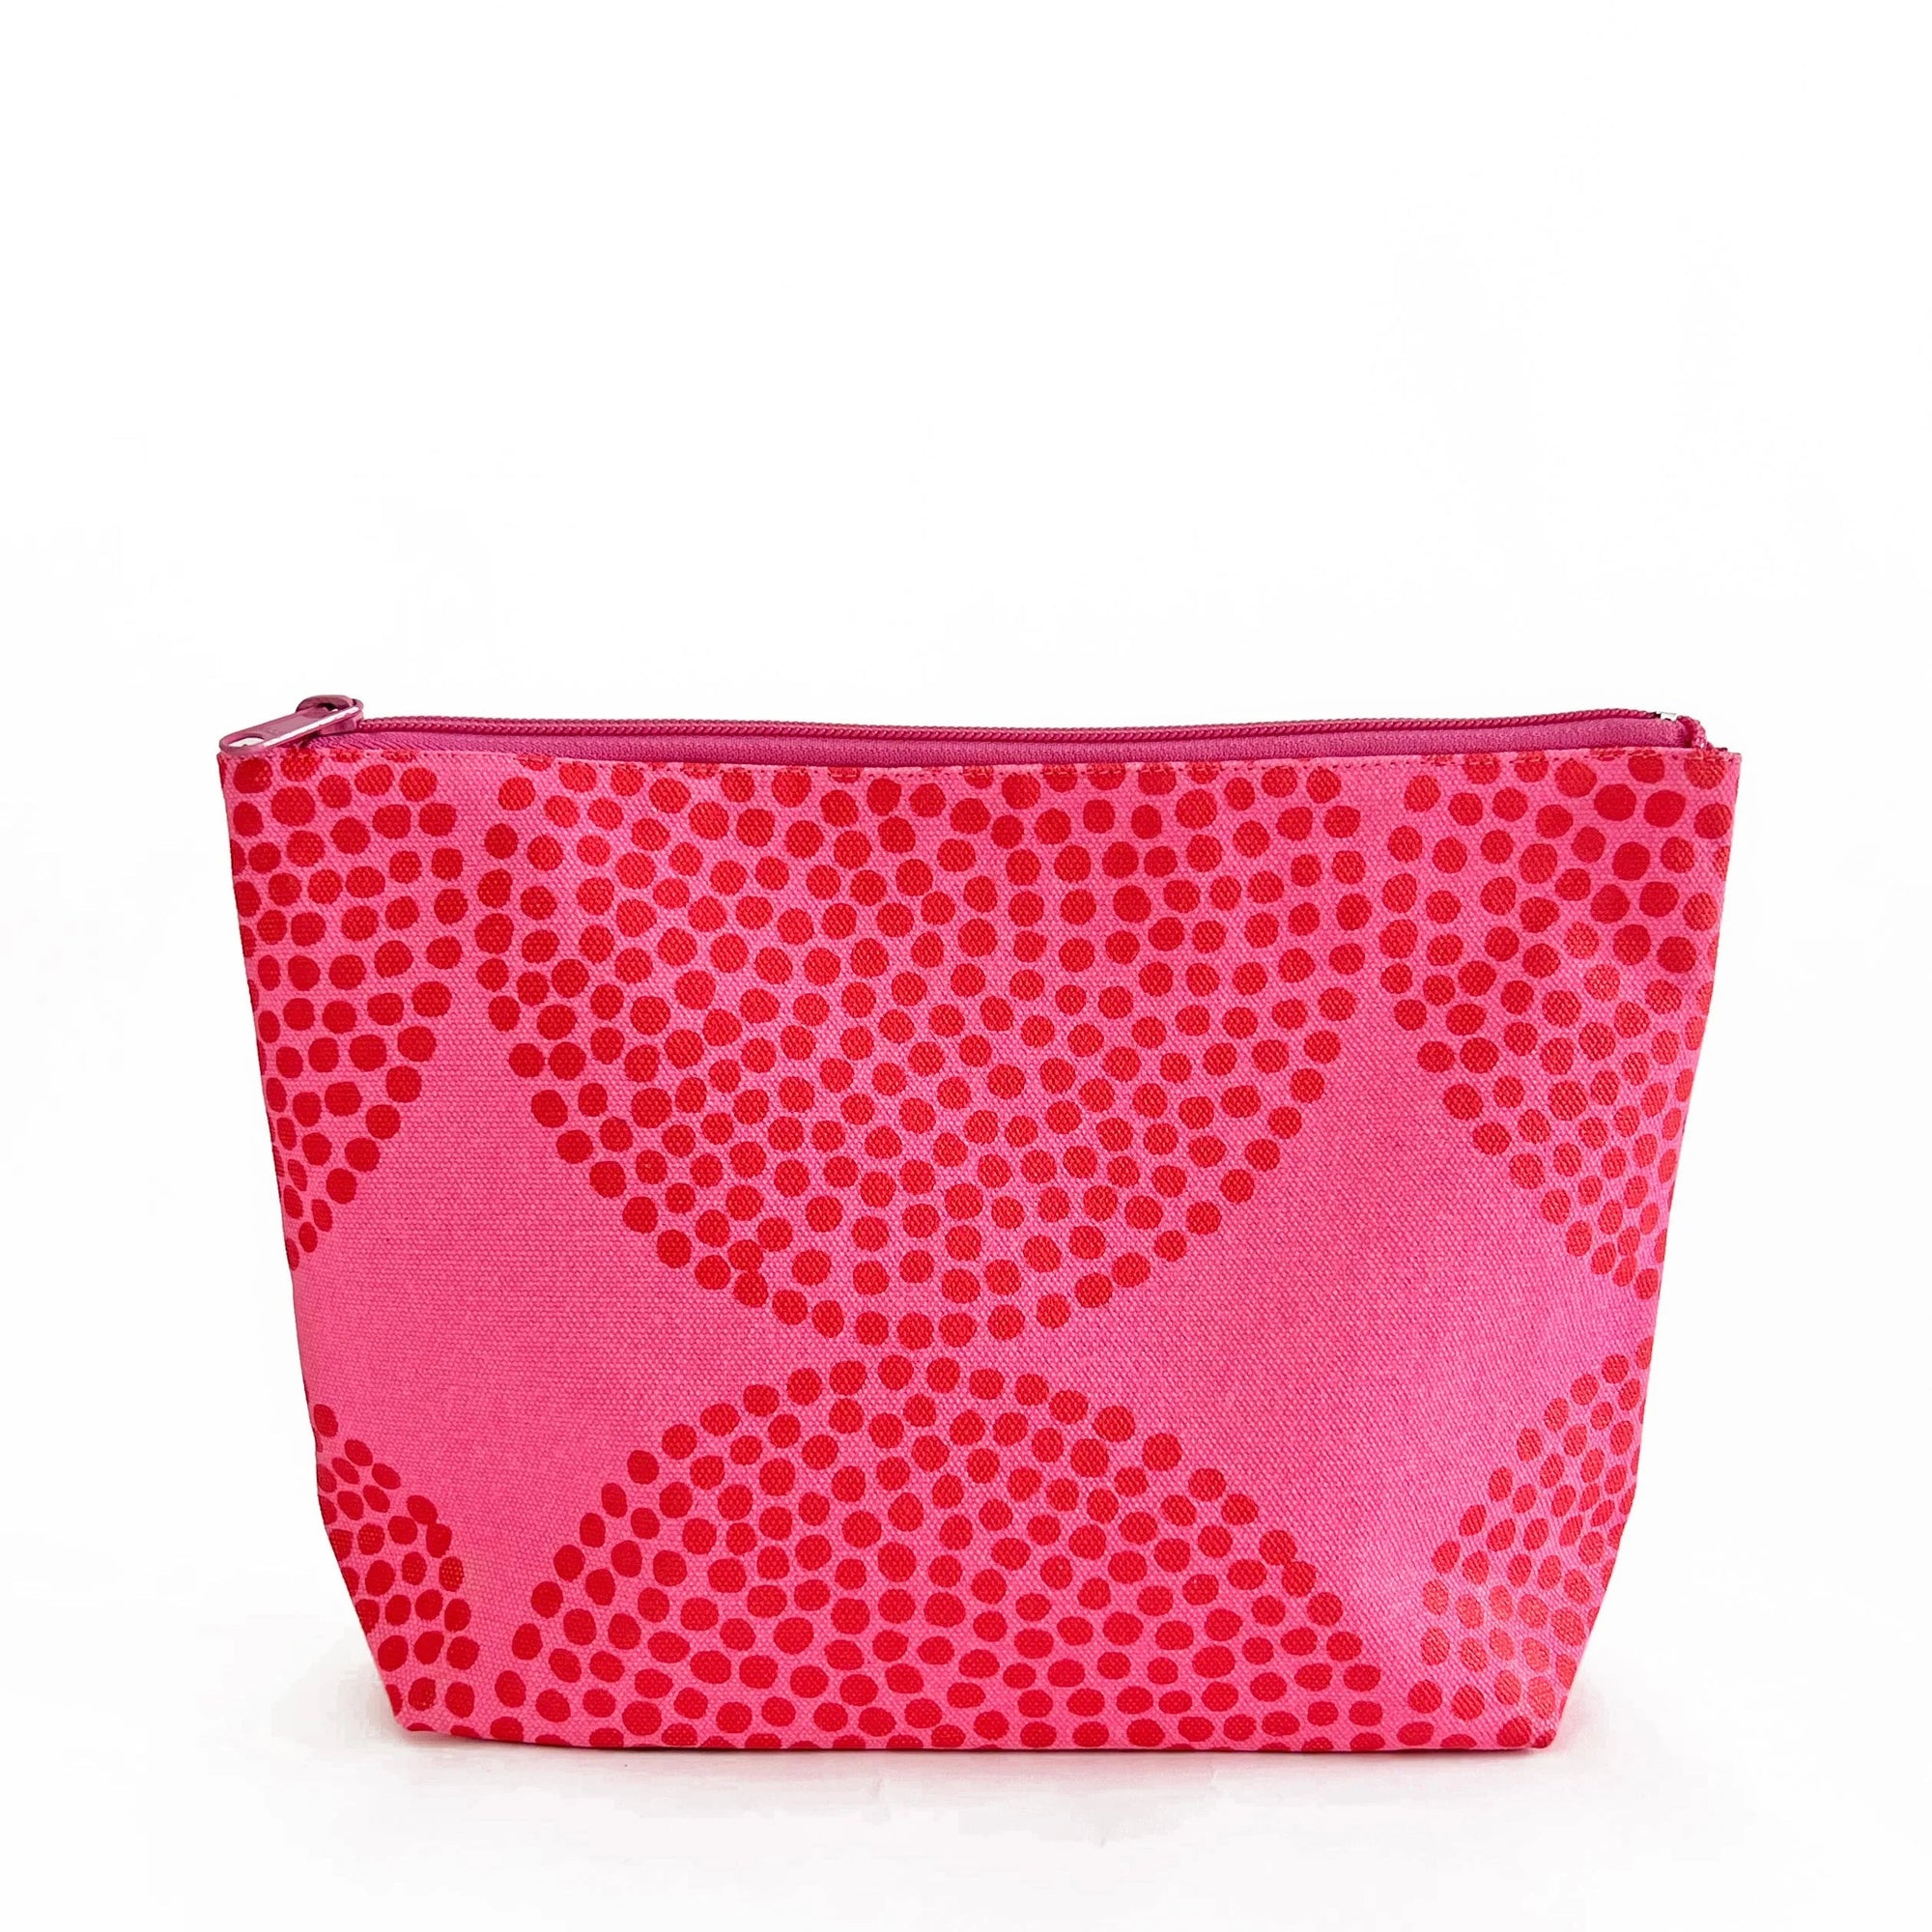 LARGE BIG WHEELS TRAVEL POUCH - PINK/RED-Case-SEE DESIGN-Coriander